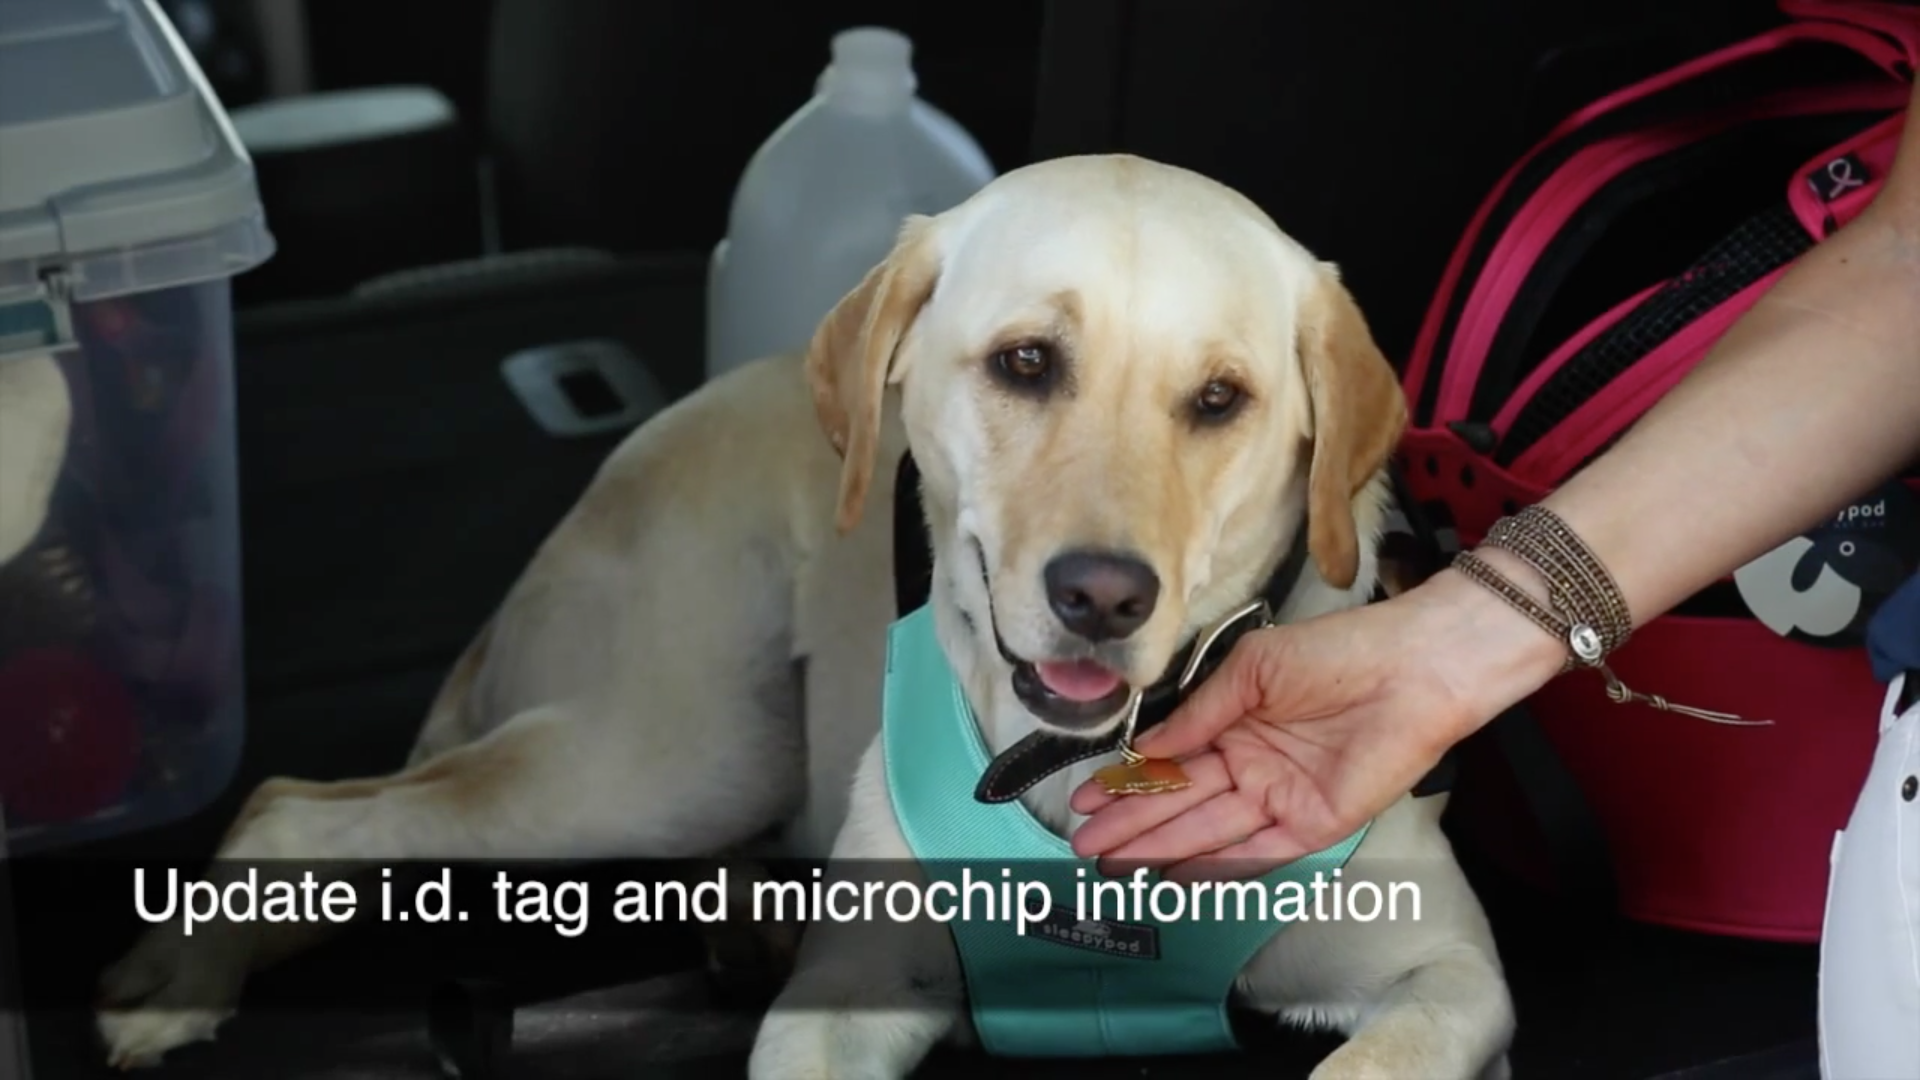 “Emergency Preparedness with Pets” tip: Update pet identification tags and microchip